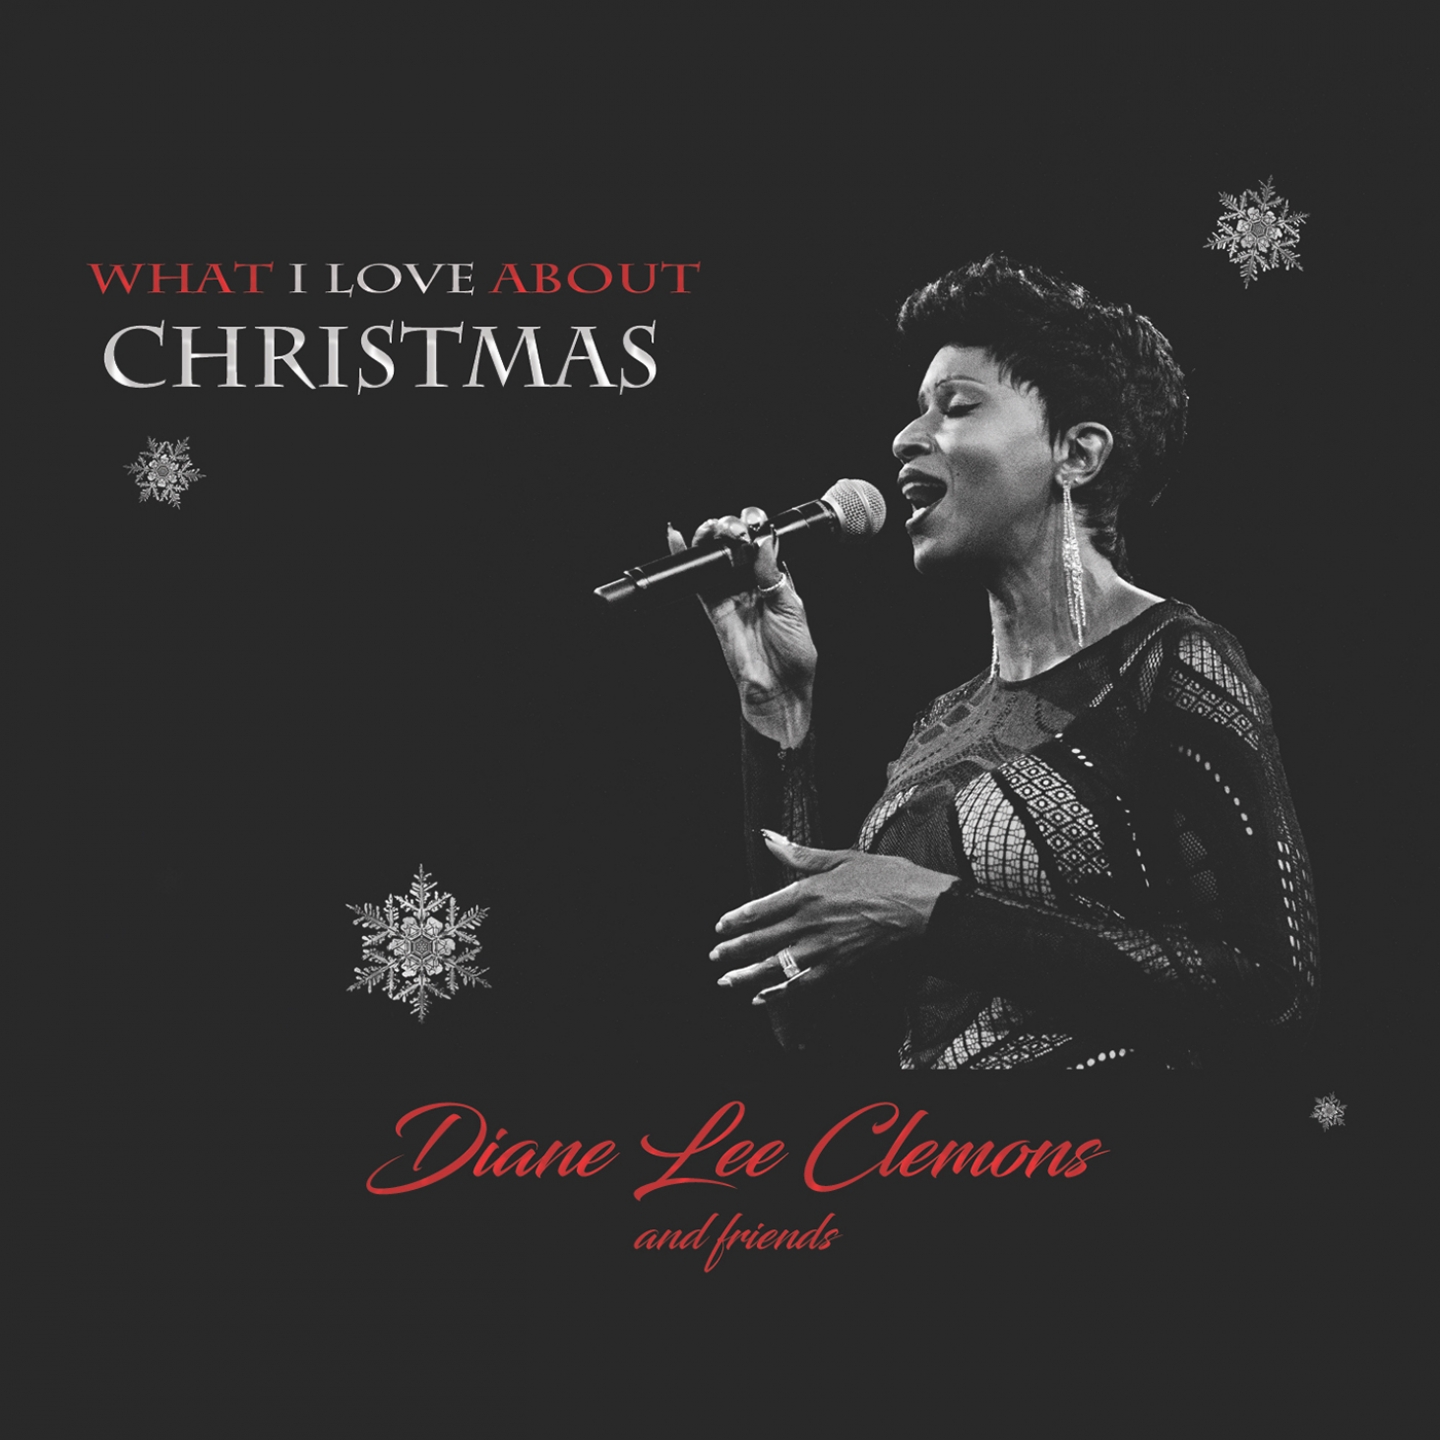 What I Love About Christmas (Diane Lee Clemons and Friends)